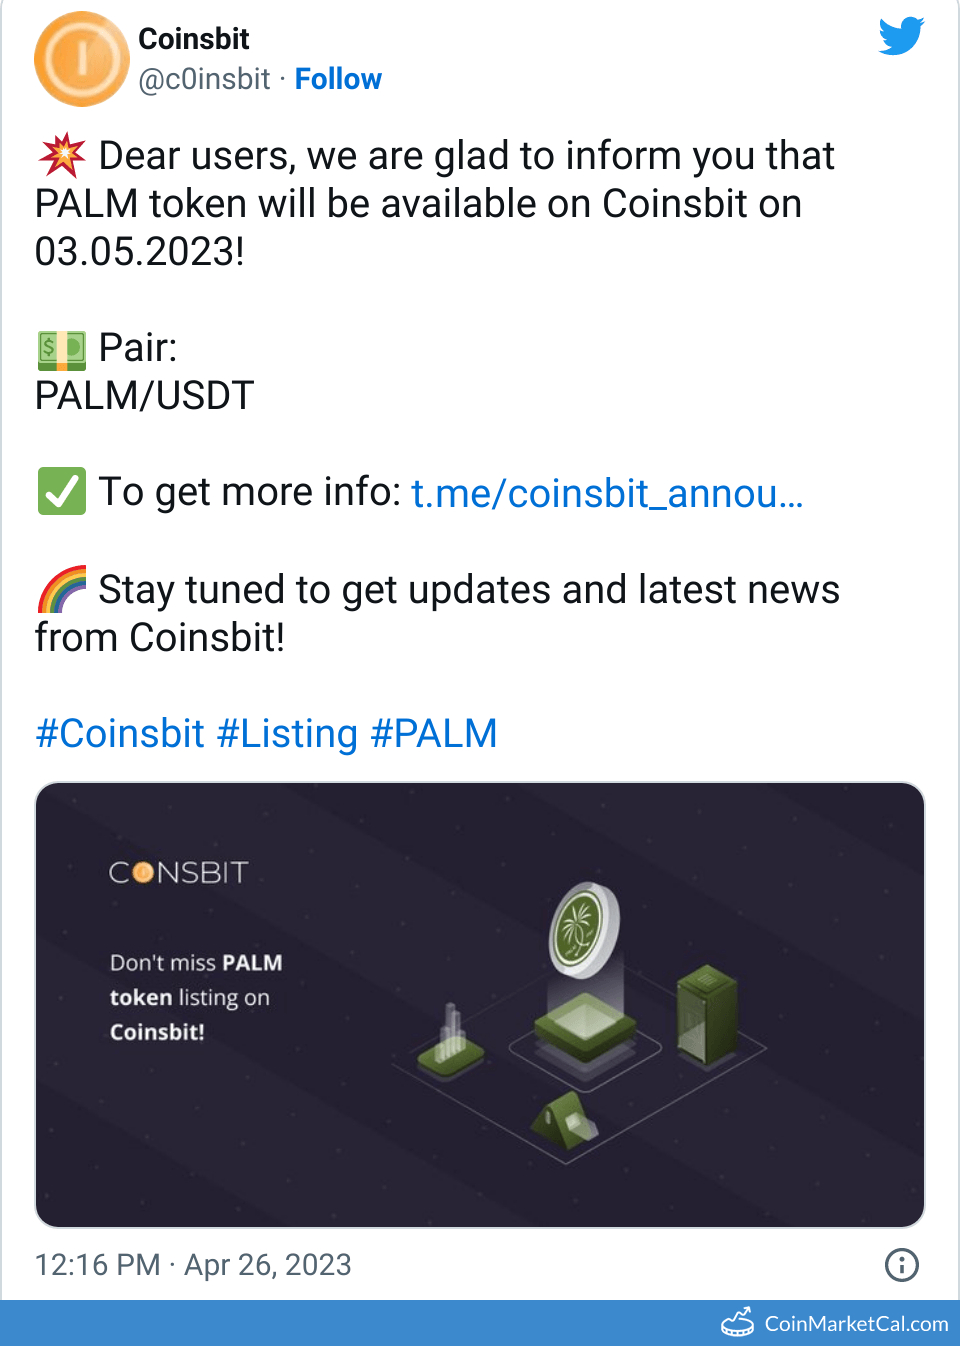 Coinsbit Listing image